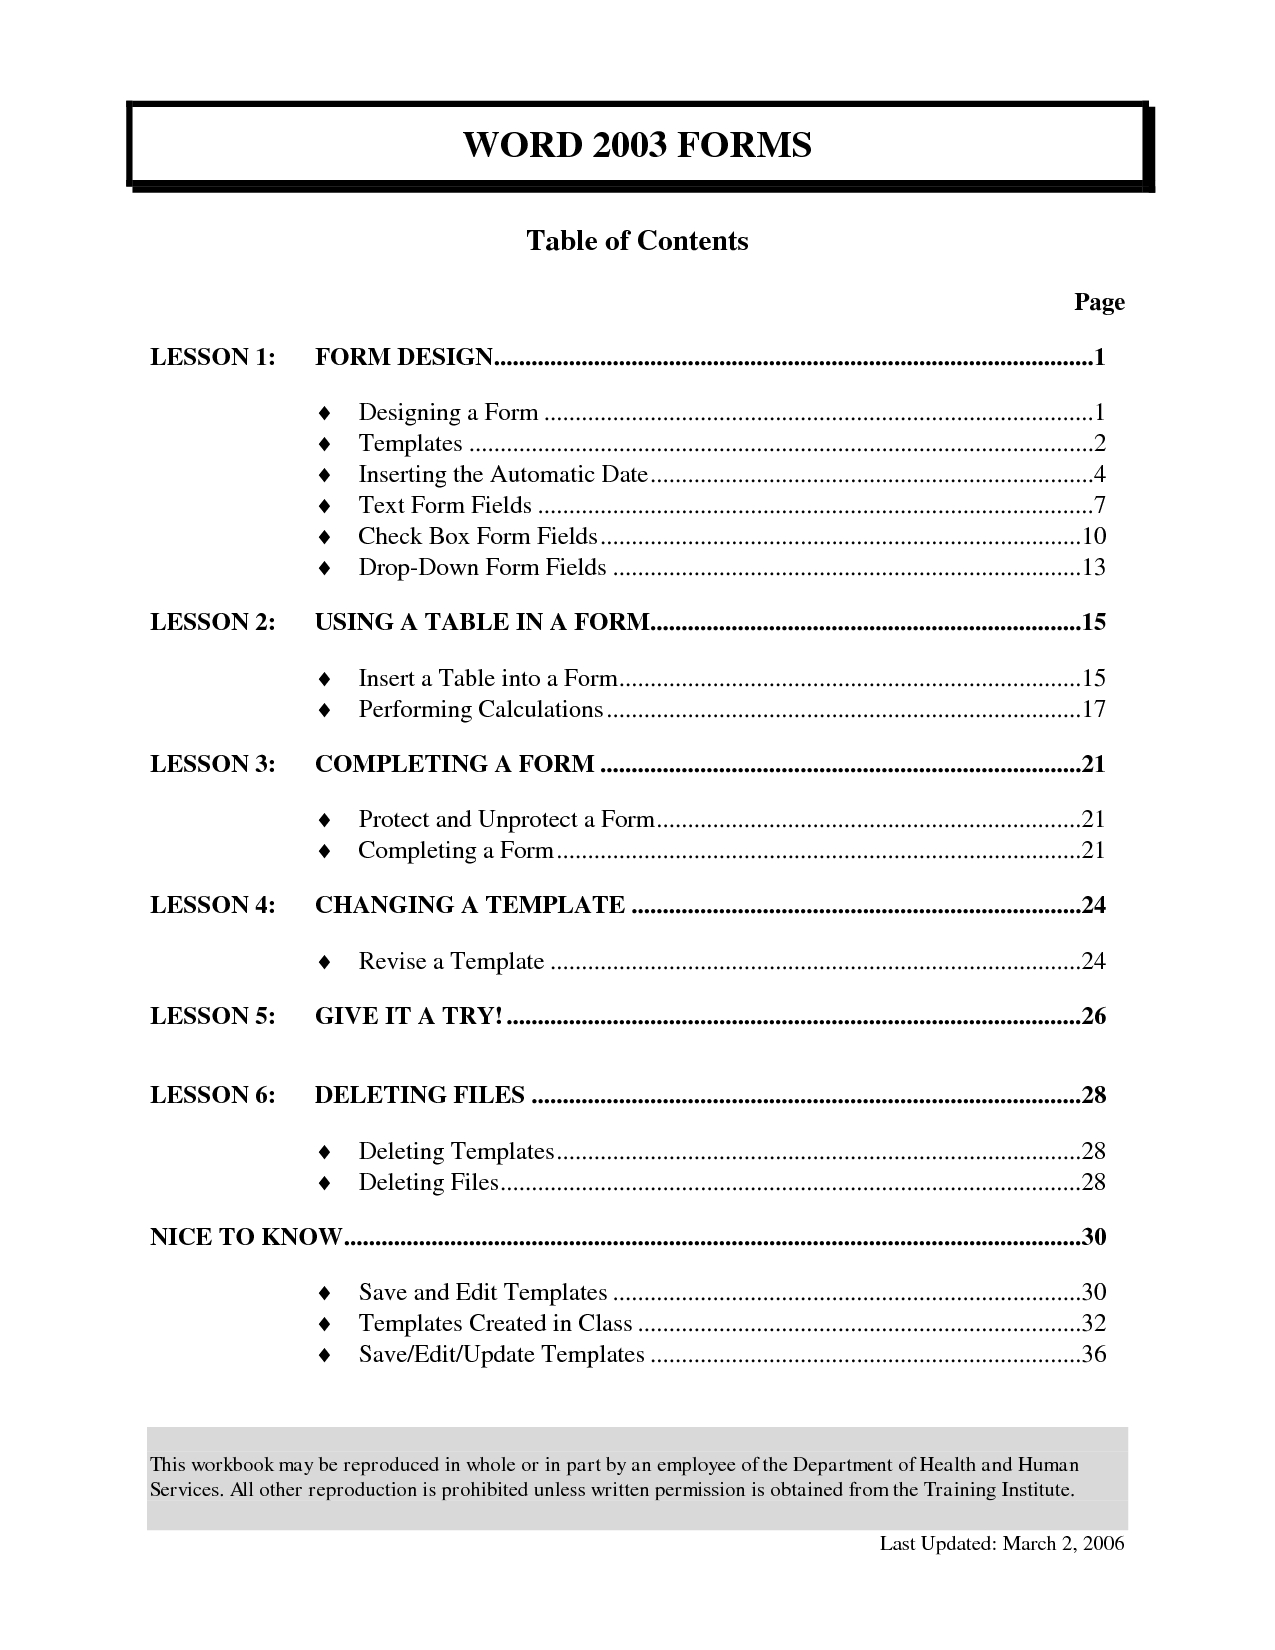 Table Of Contents Template  New Images  Office Tipstemplates for Microsoft Word Table Of Contents Template